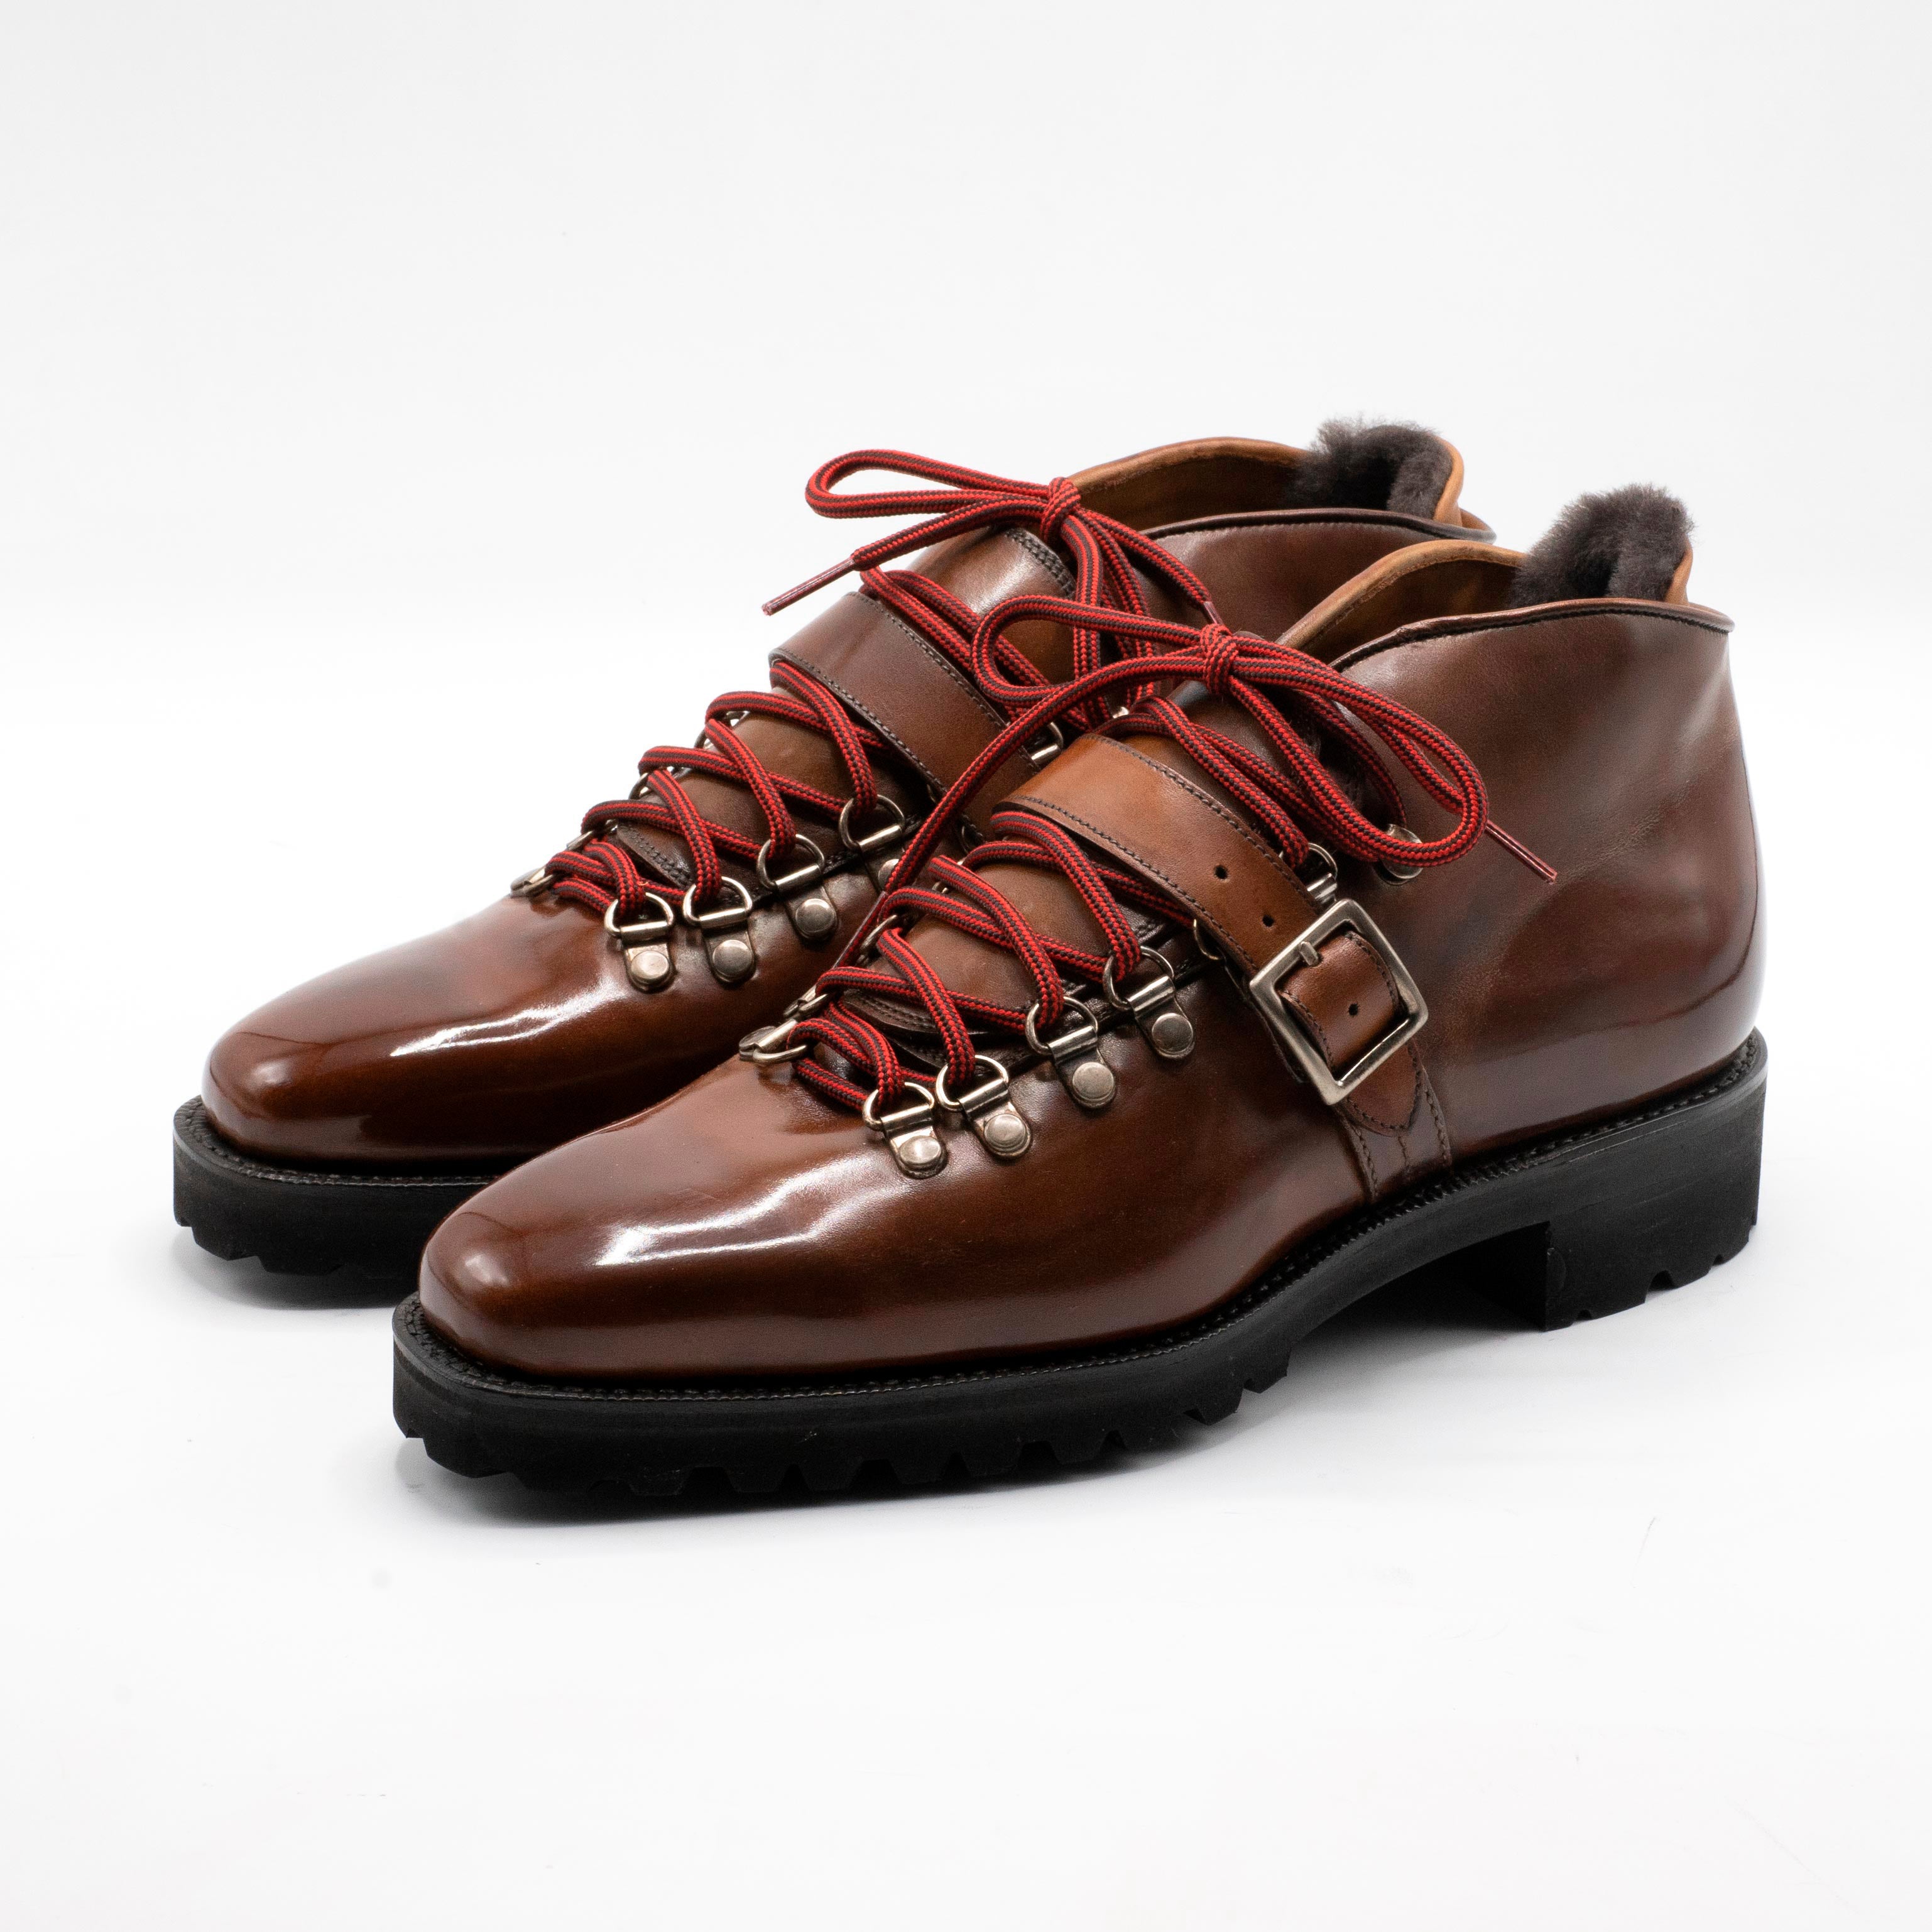 Borcego mountain boot made in Spain by Norman Vilalta